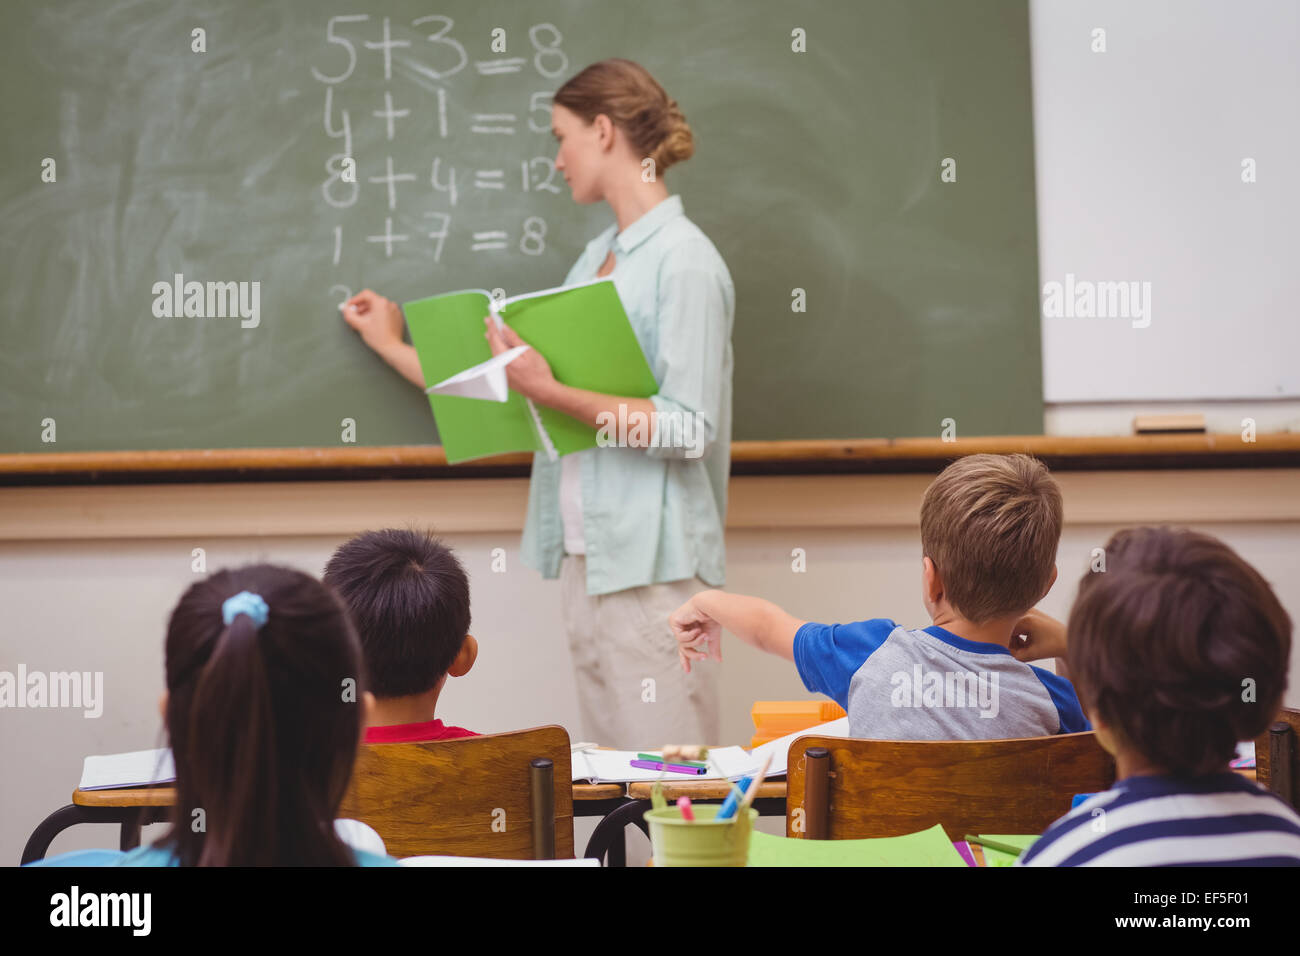 Naughty pupil throwing paper airplane in class Stock Photo